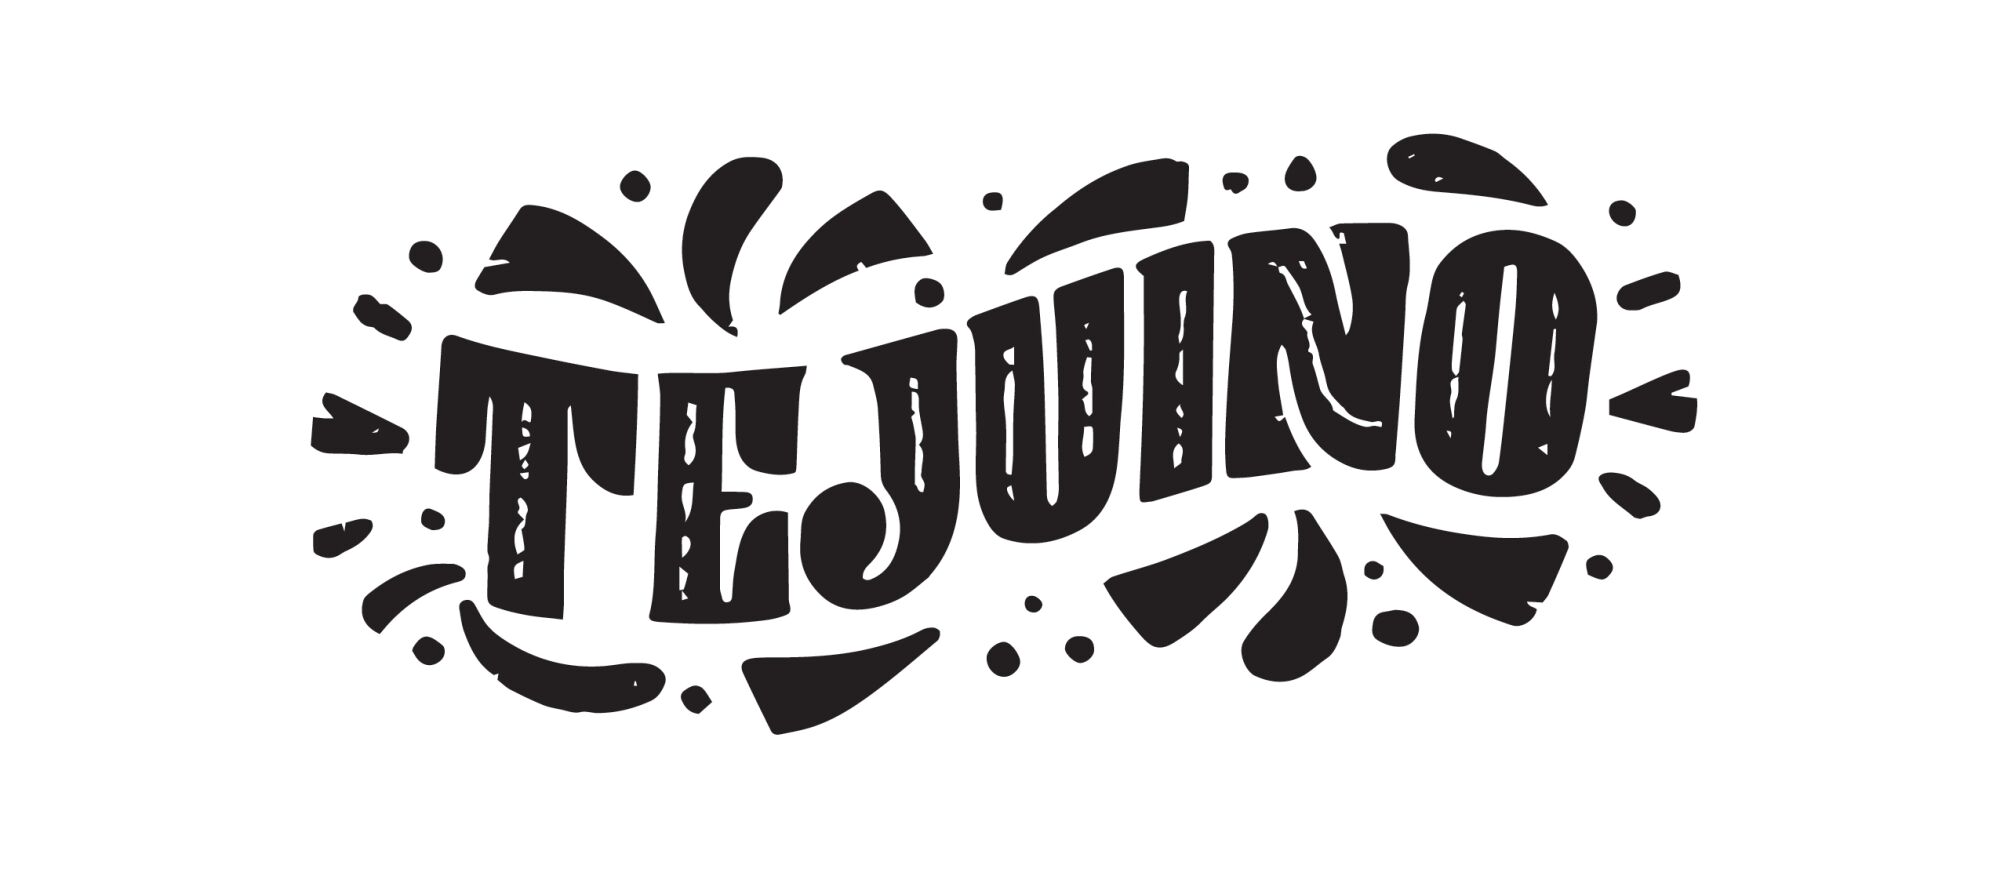 Typography of the word Tejuino